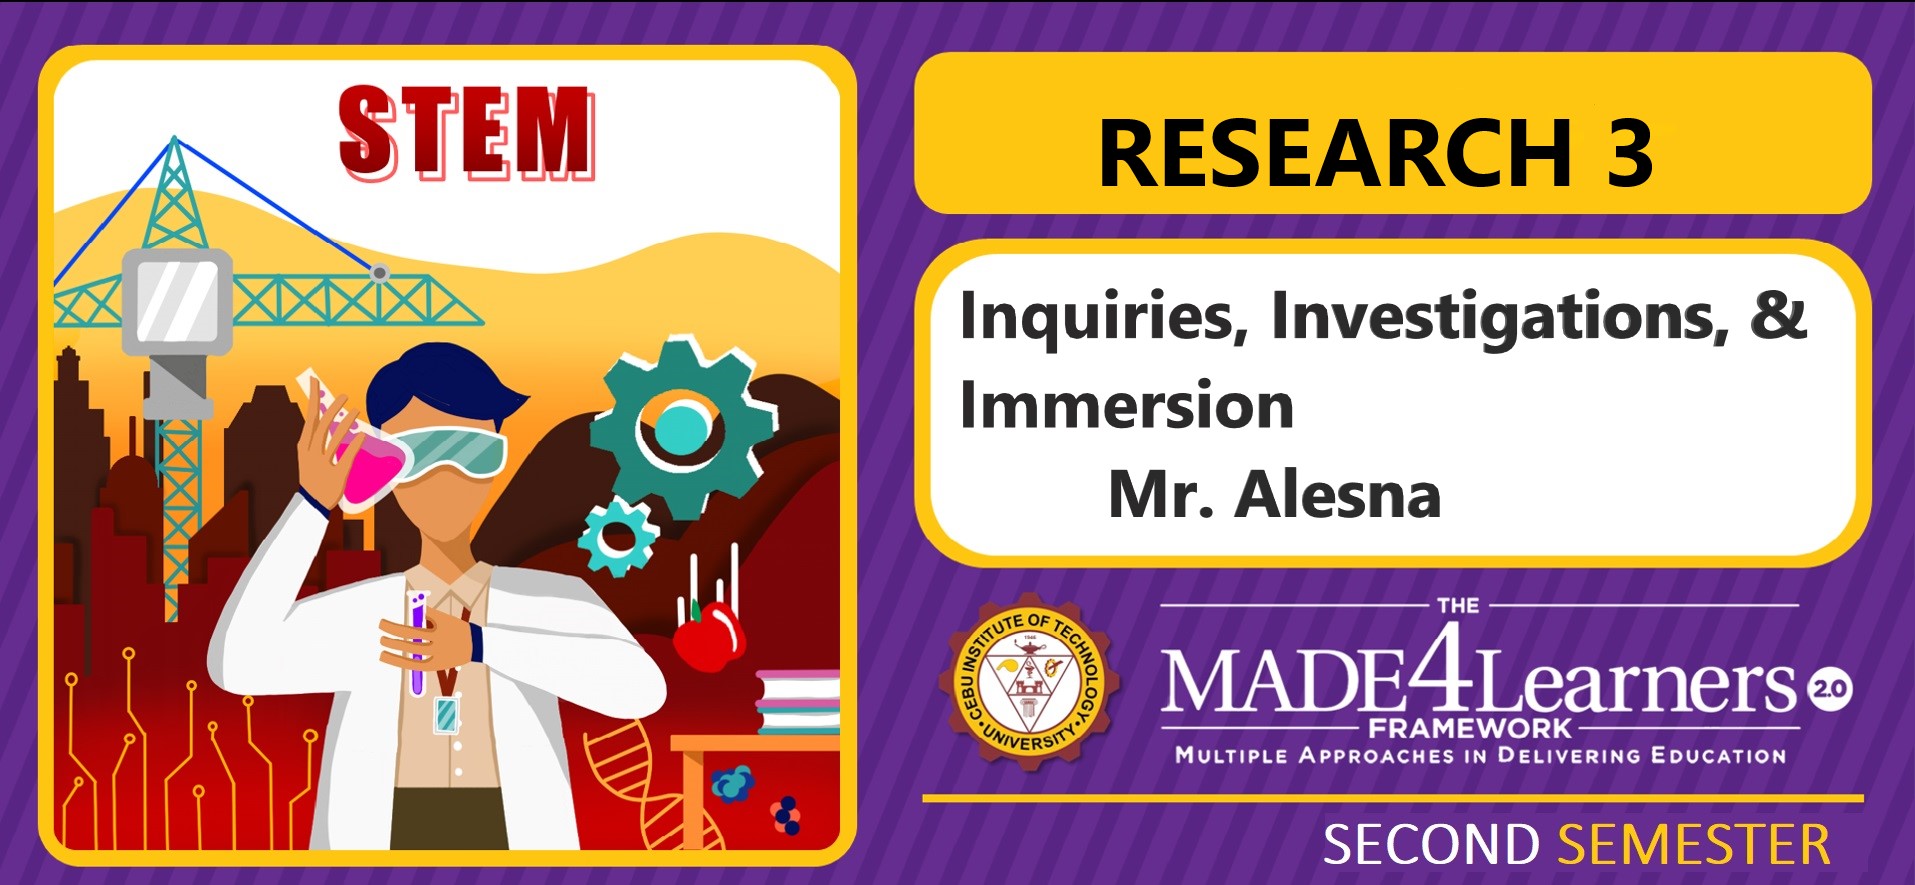 RES3: Research Inquiries, Investigation and Immersion (Alesna)